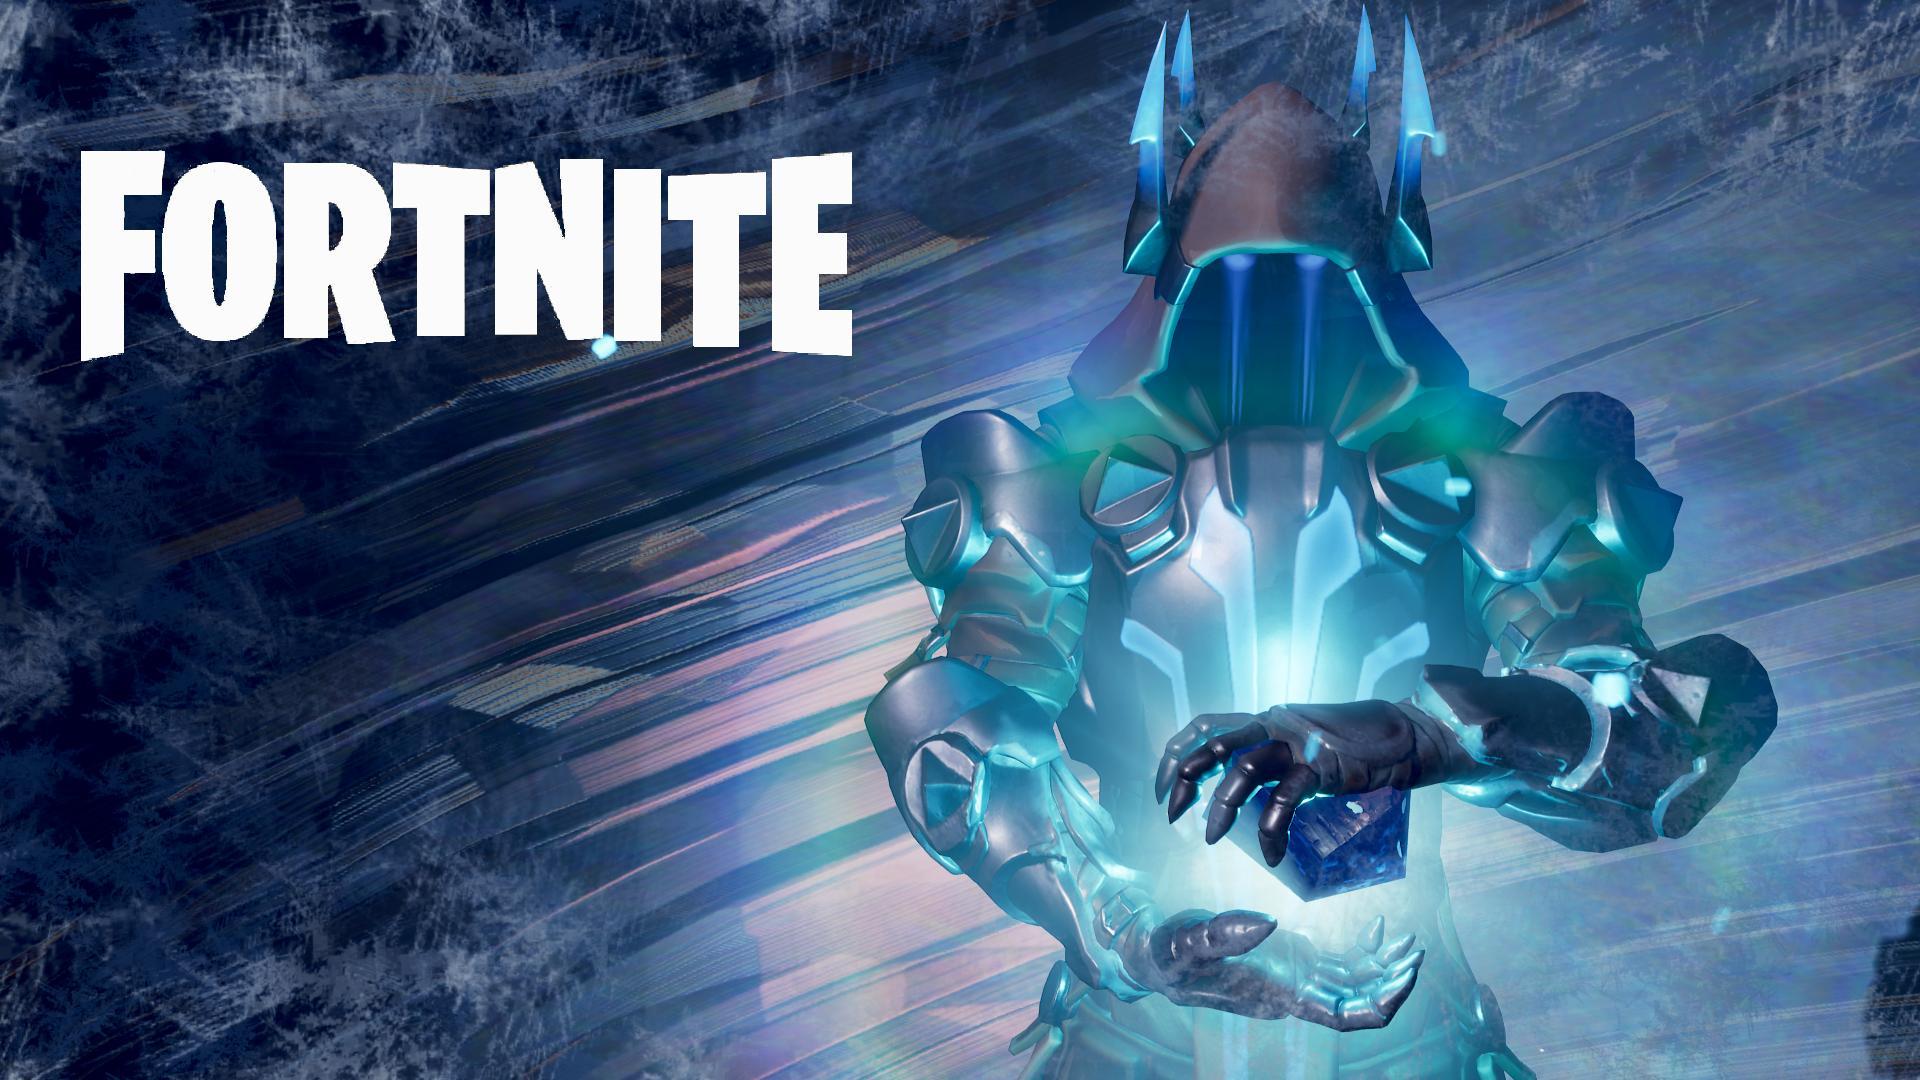 Fortnite Ice King Event Wallpaper I made with Replay Mode. Please